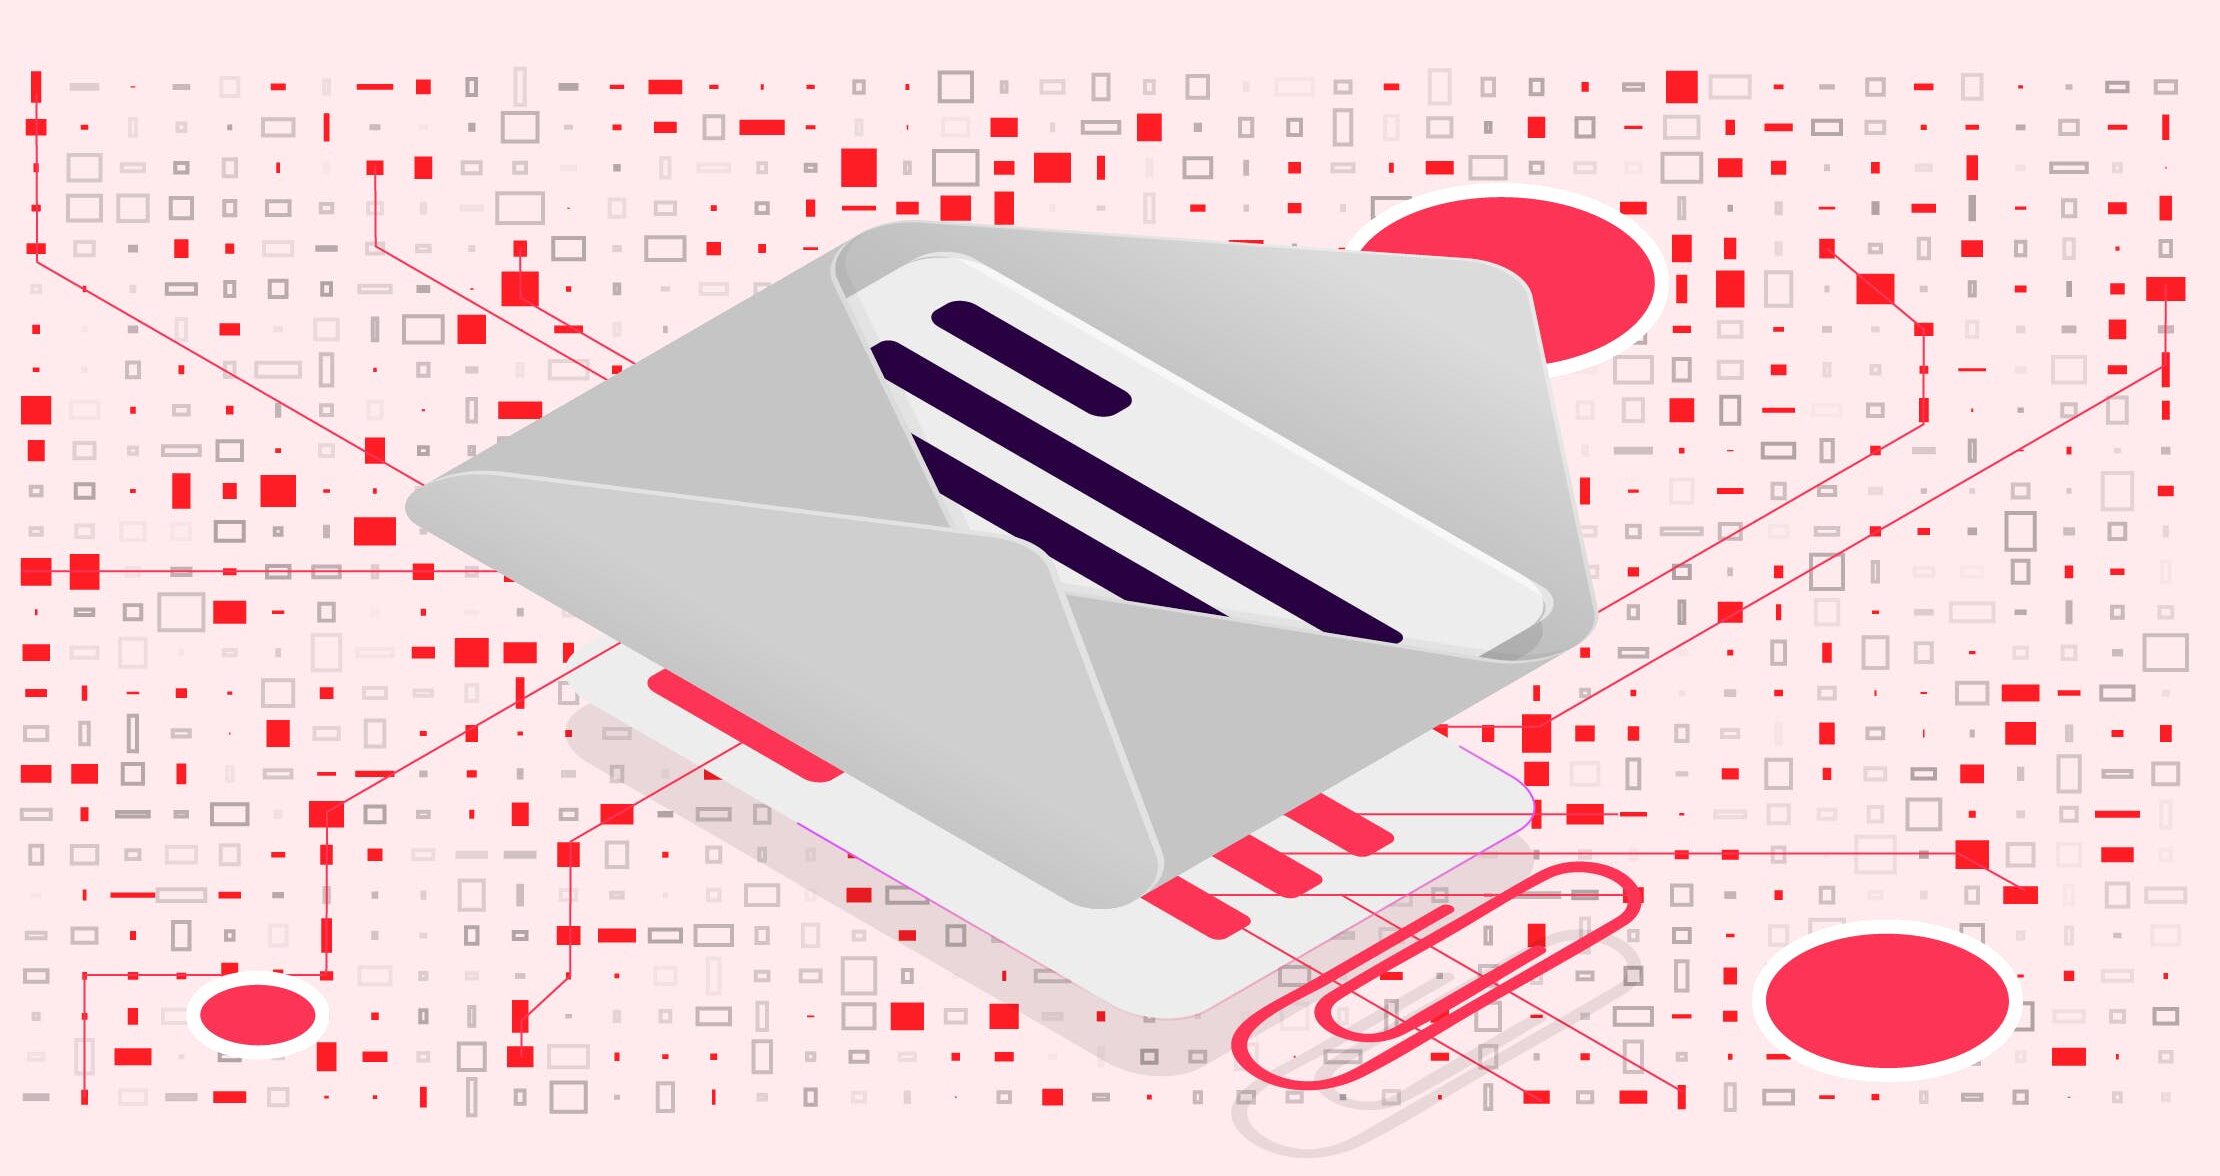 Webmail: what is it and what are its advantages and disadvantages?